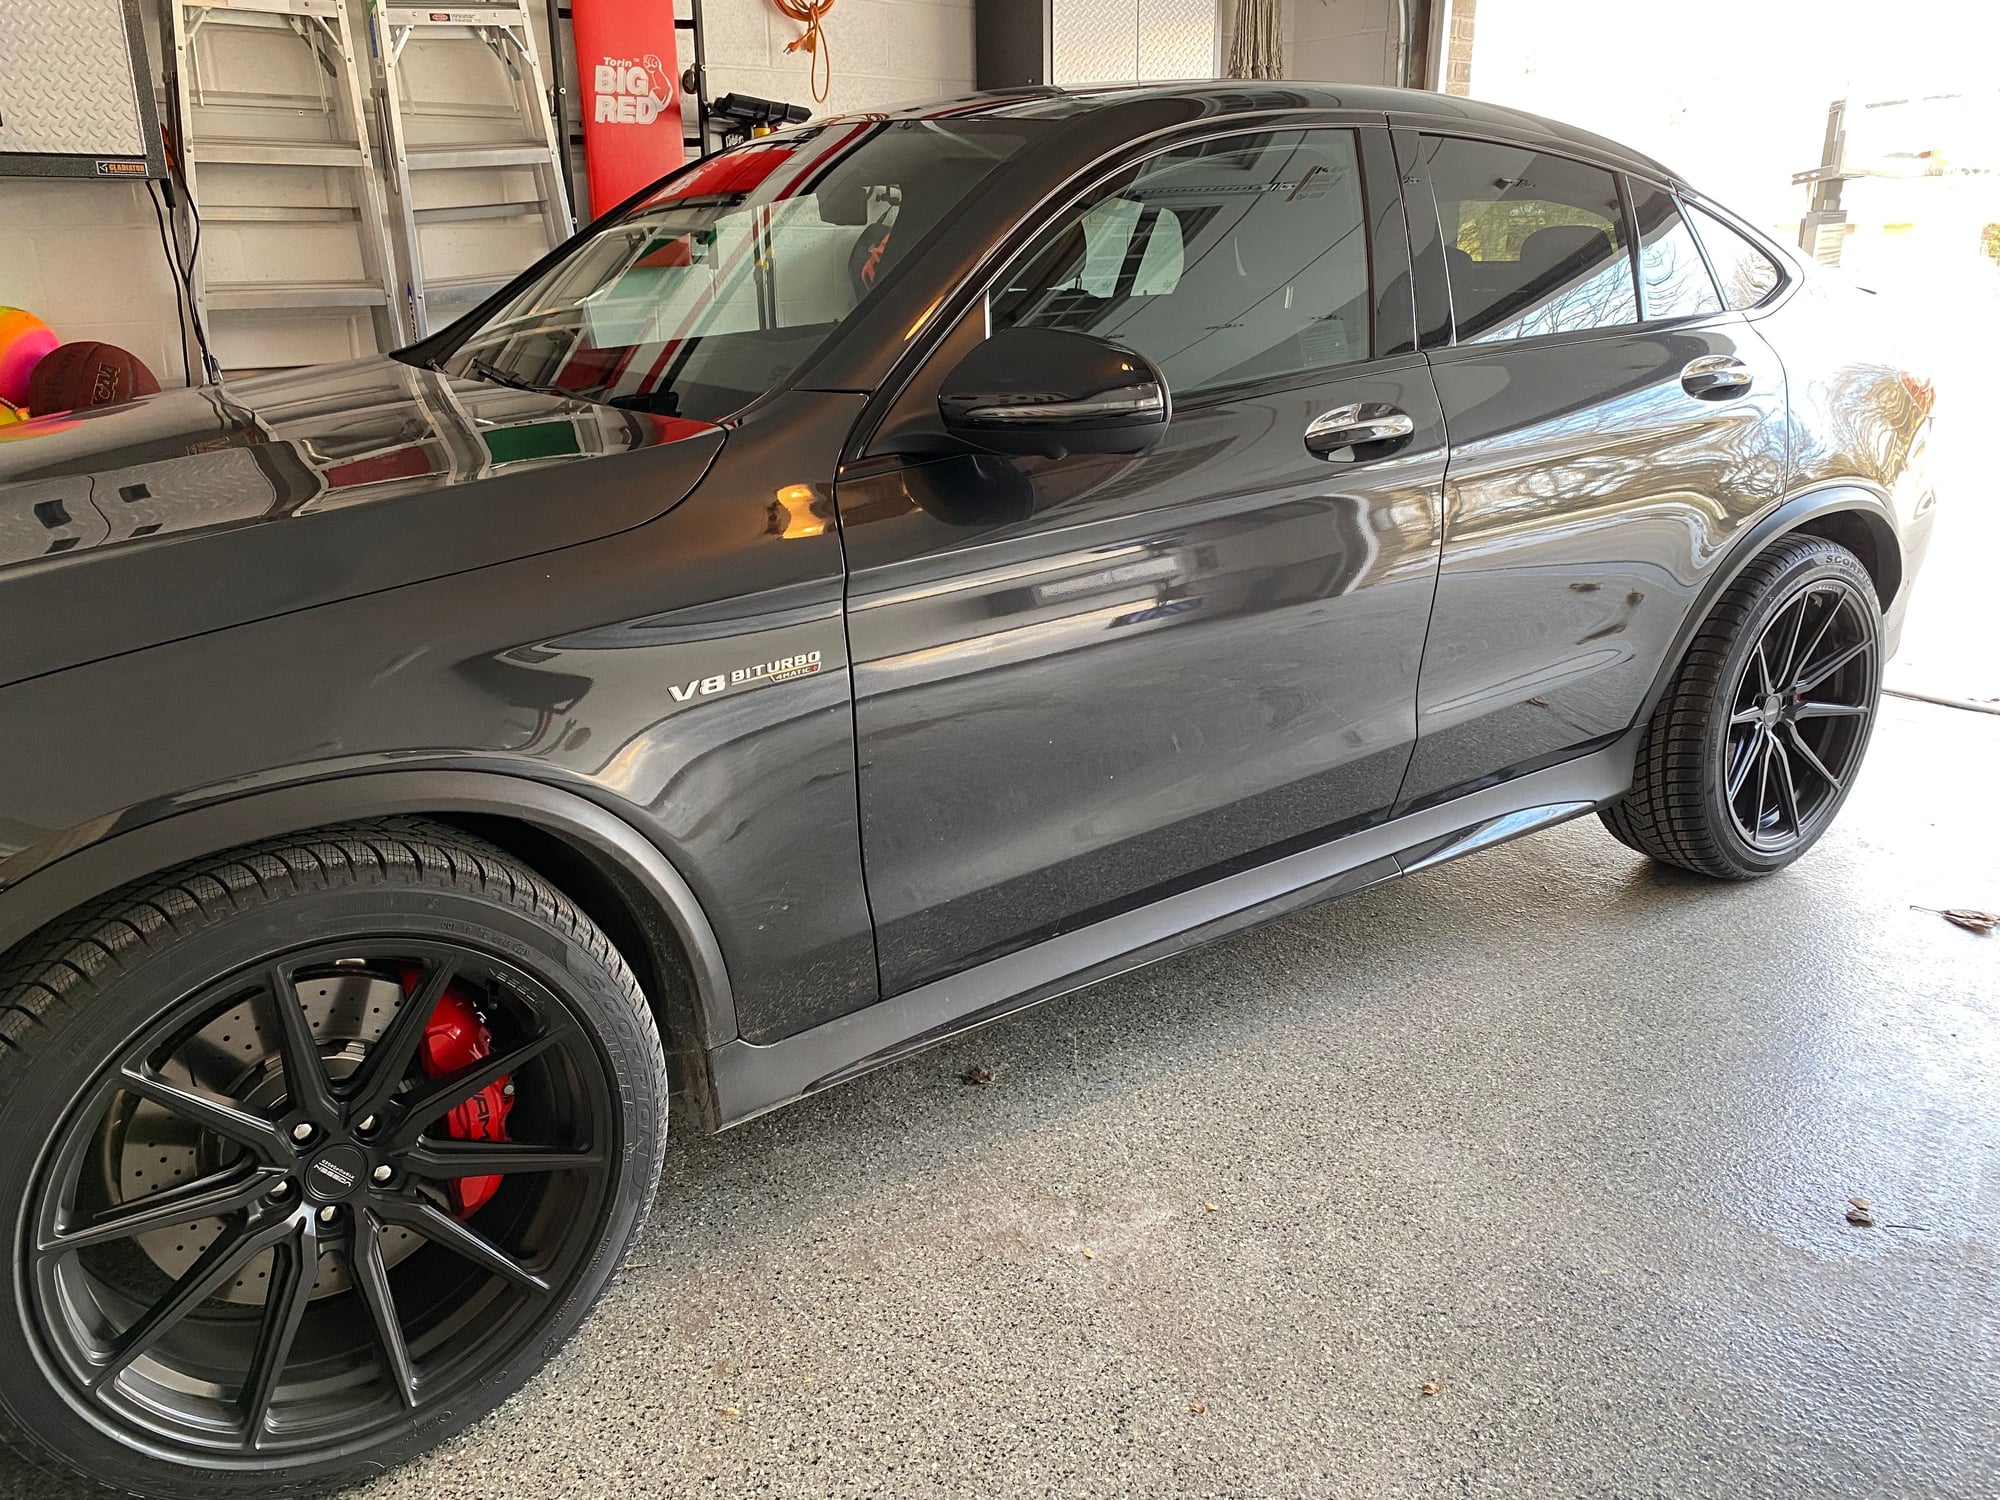 Wheels and Tires/Axles - Moving Sales: New 2021 GLC AMG 21" Vossen HF-3 Wheels / Scorpion Winter Tires - Used - 2016 to 2023 Mercedes-Benz GLC-Class - Glenview, IL 60025, United States